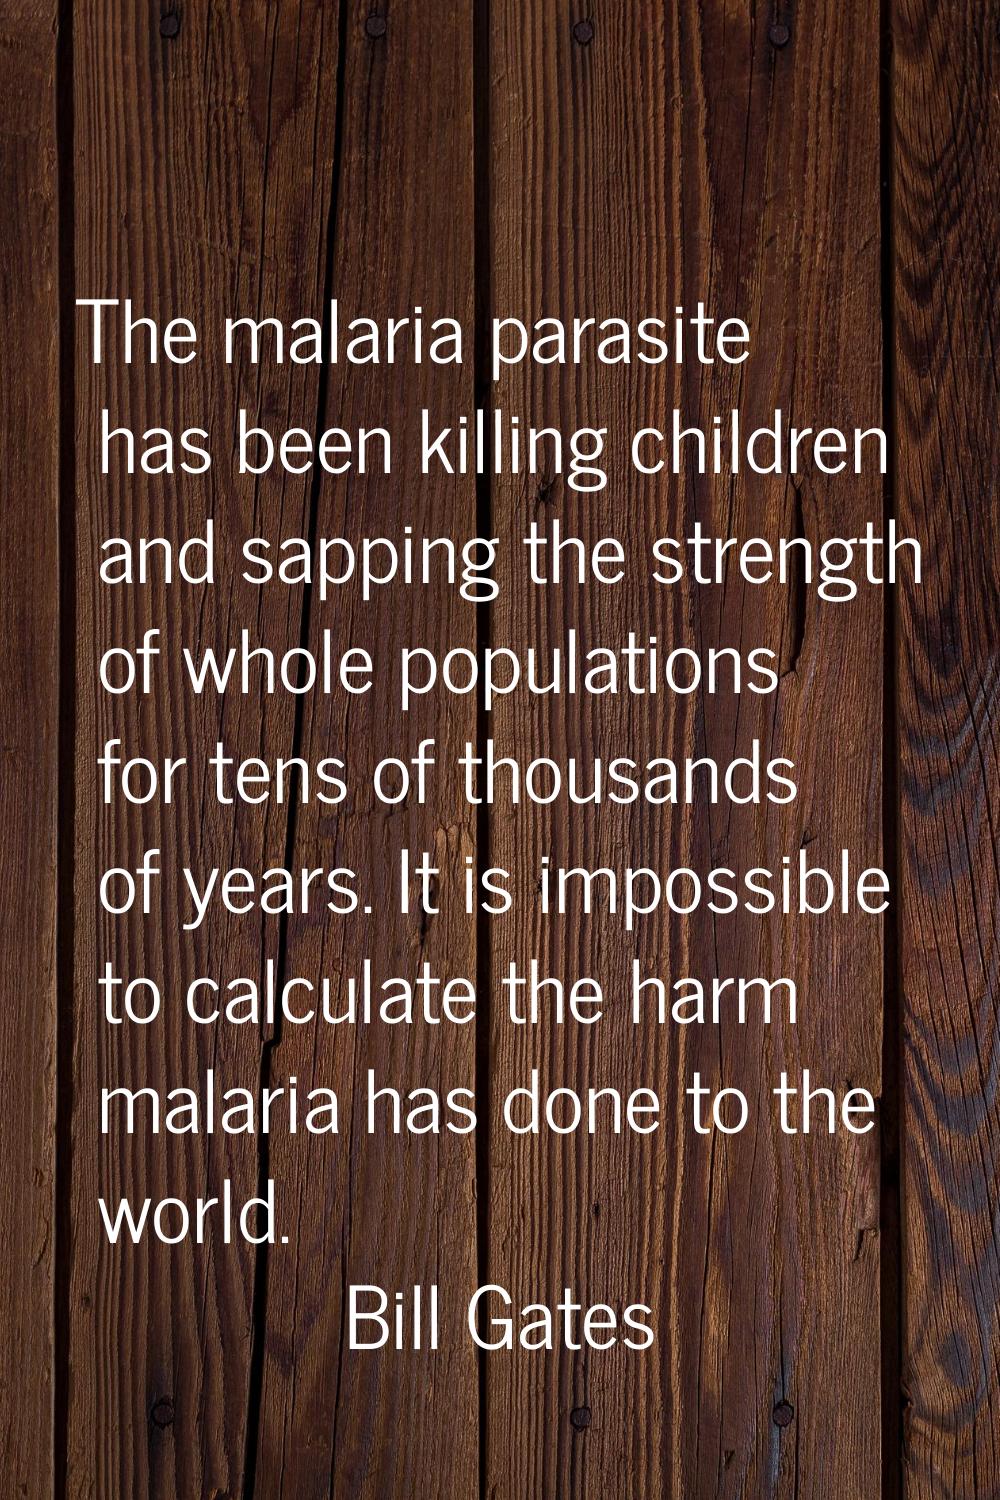 The malaria parasite has been killing children and sapping the strength of whole populations for te